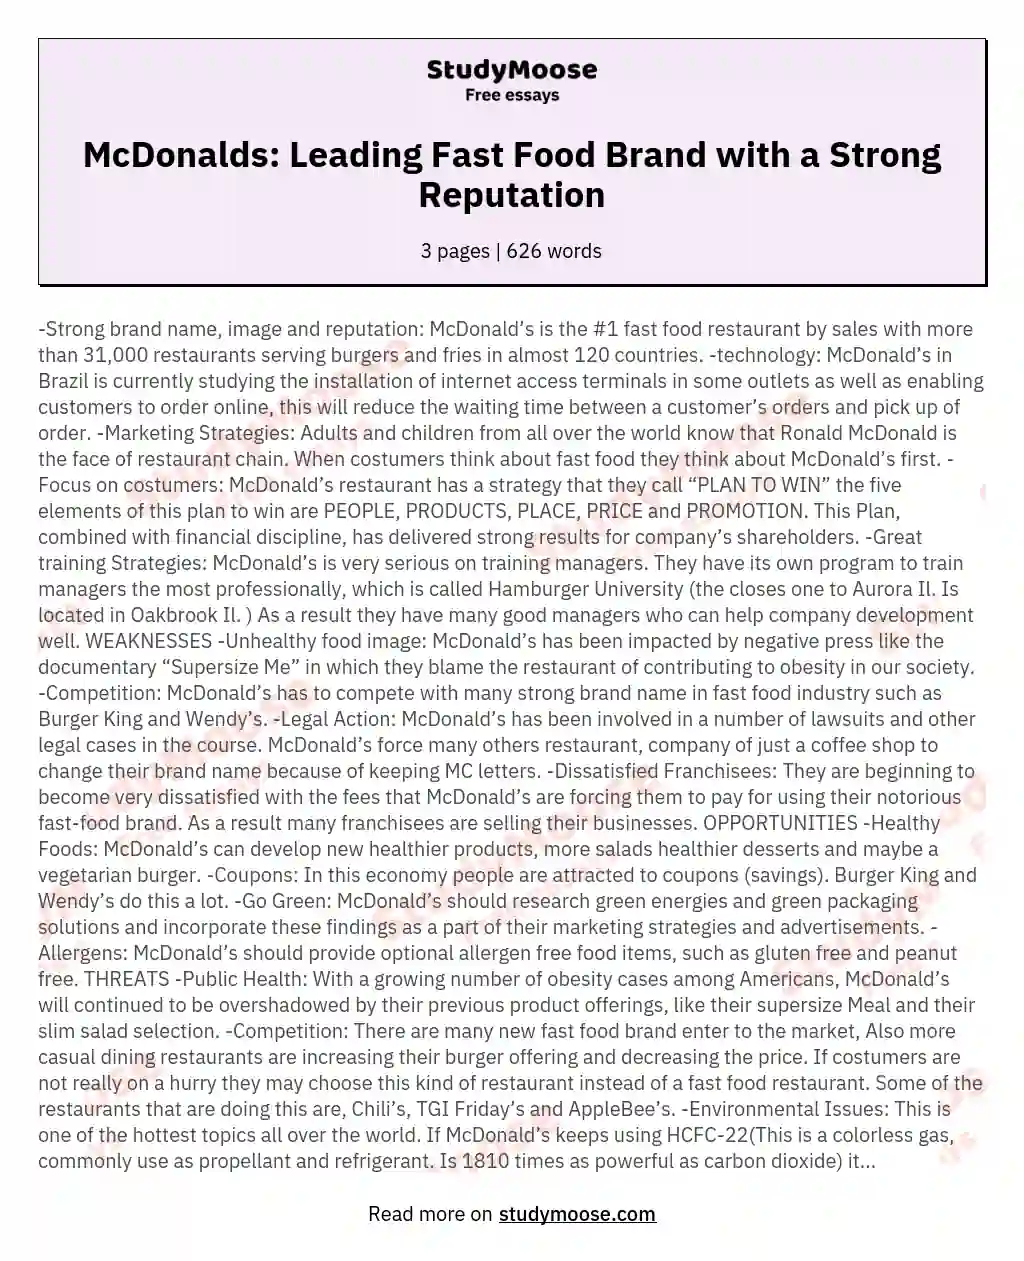 McDonalds: Leading Fast Food Brand with a Strong Reputation